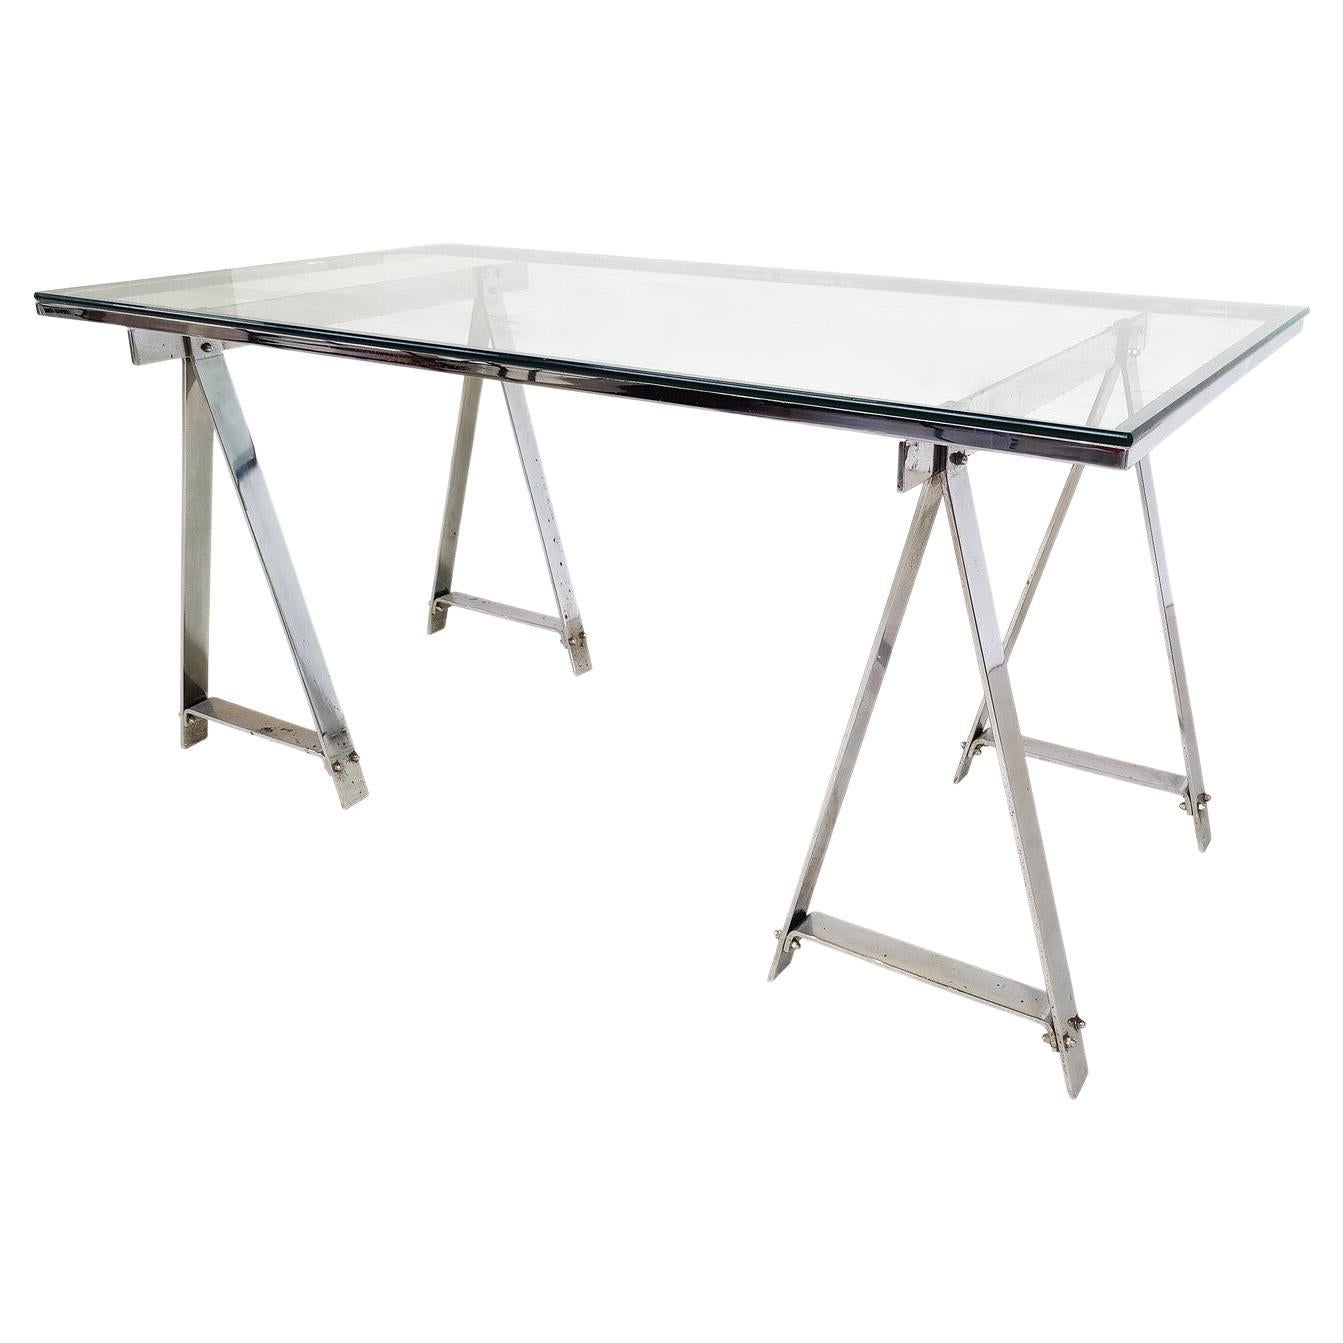 Mid-Century Modern Dining Table/Desk, Chrome and Glass, Italy, 1970s For Sale